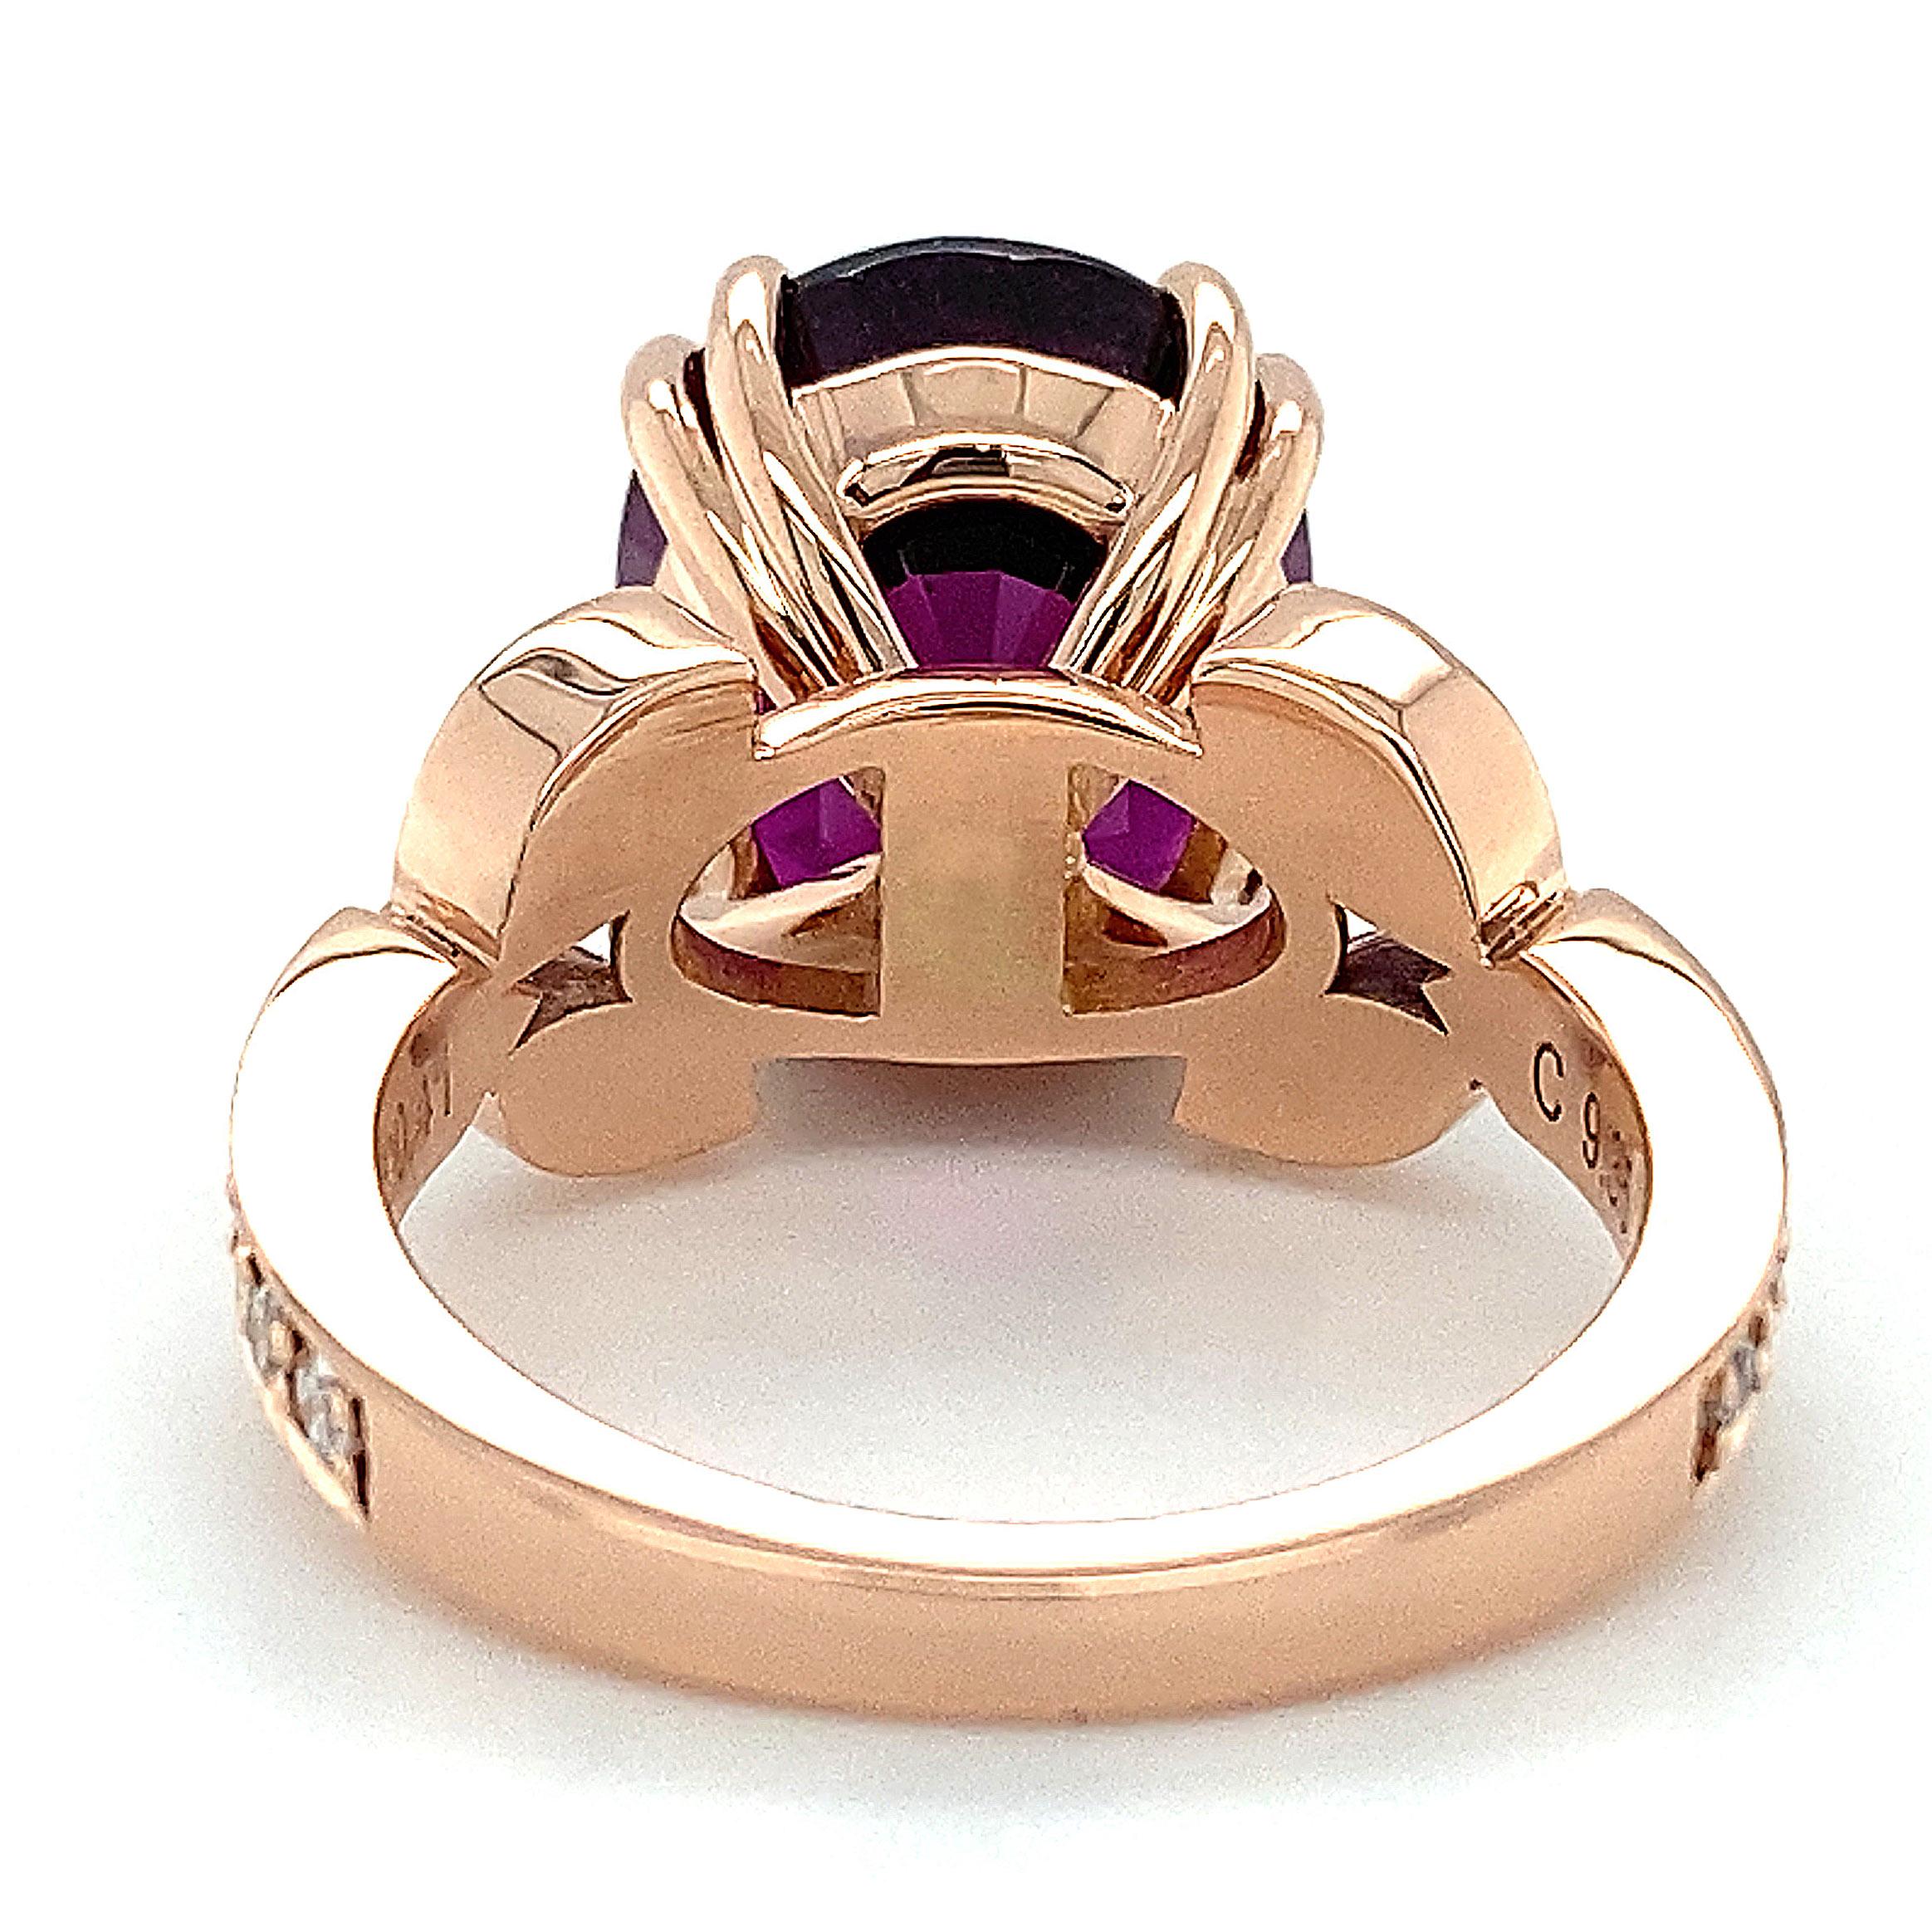 Mixed Cut 9.35 Сarats Neon Purple Garnet Stone set in 18K Rose Gold Ring with Diamonds For Sale